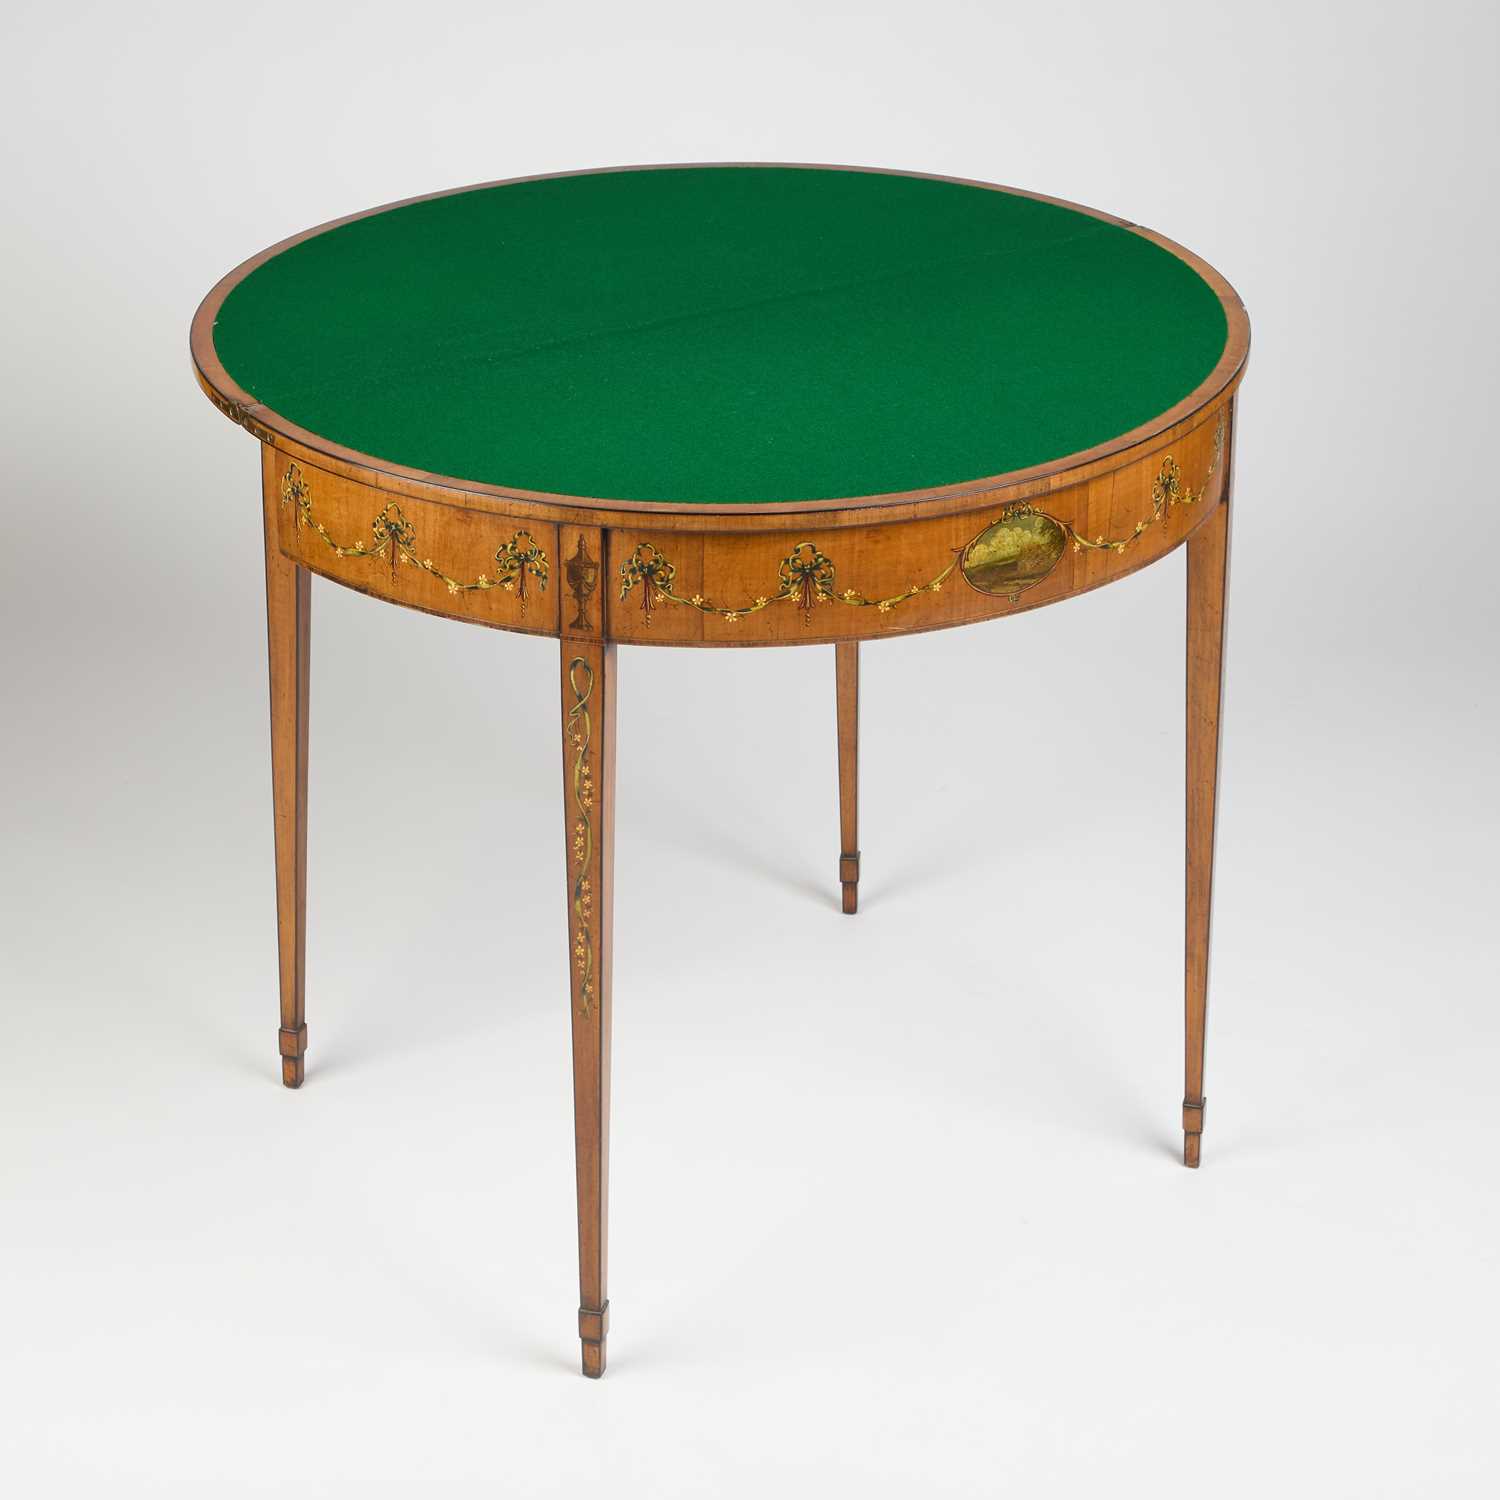 A PAIR OF 19TH CENTURY SHERATON REVIVAL PAINTED AND ROSEWOOD BANDED SATINWOOD CARD TABLES - Image 2 of 2